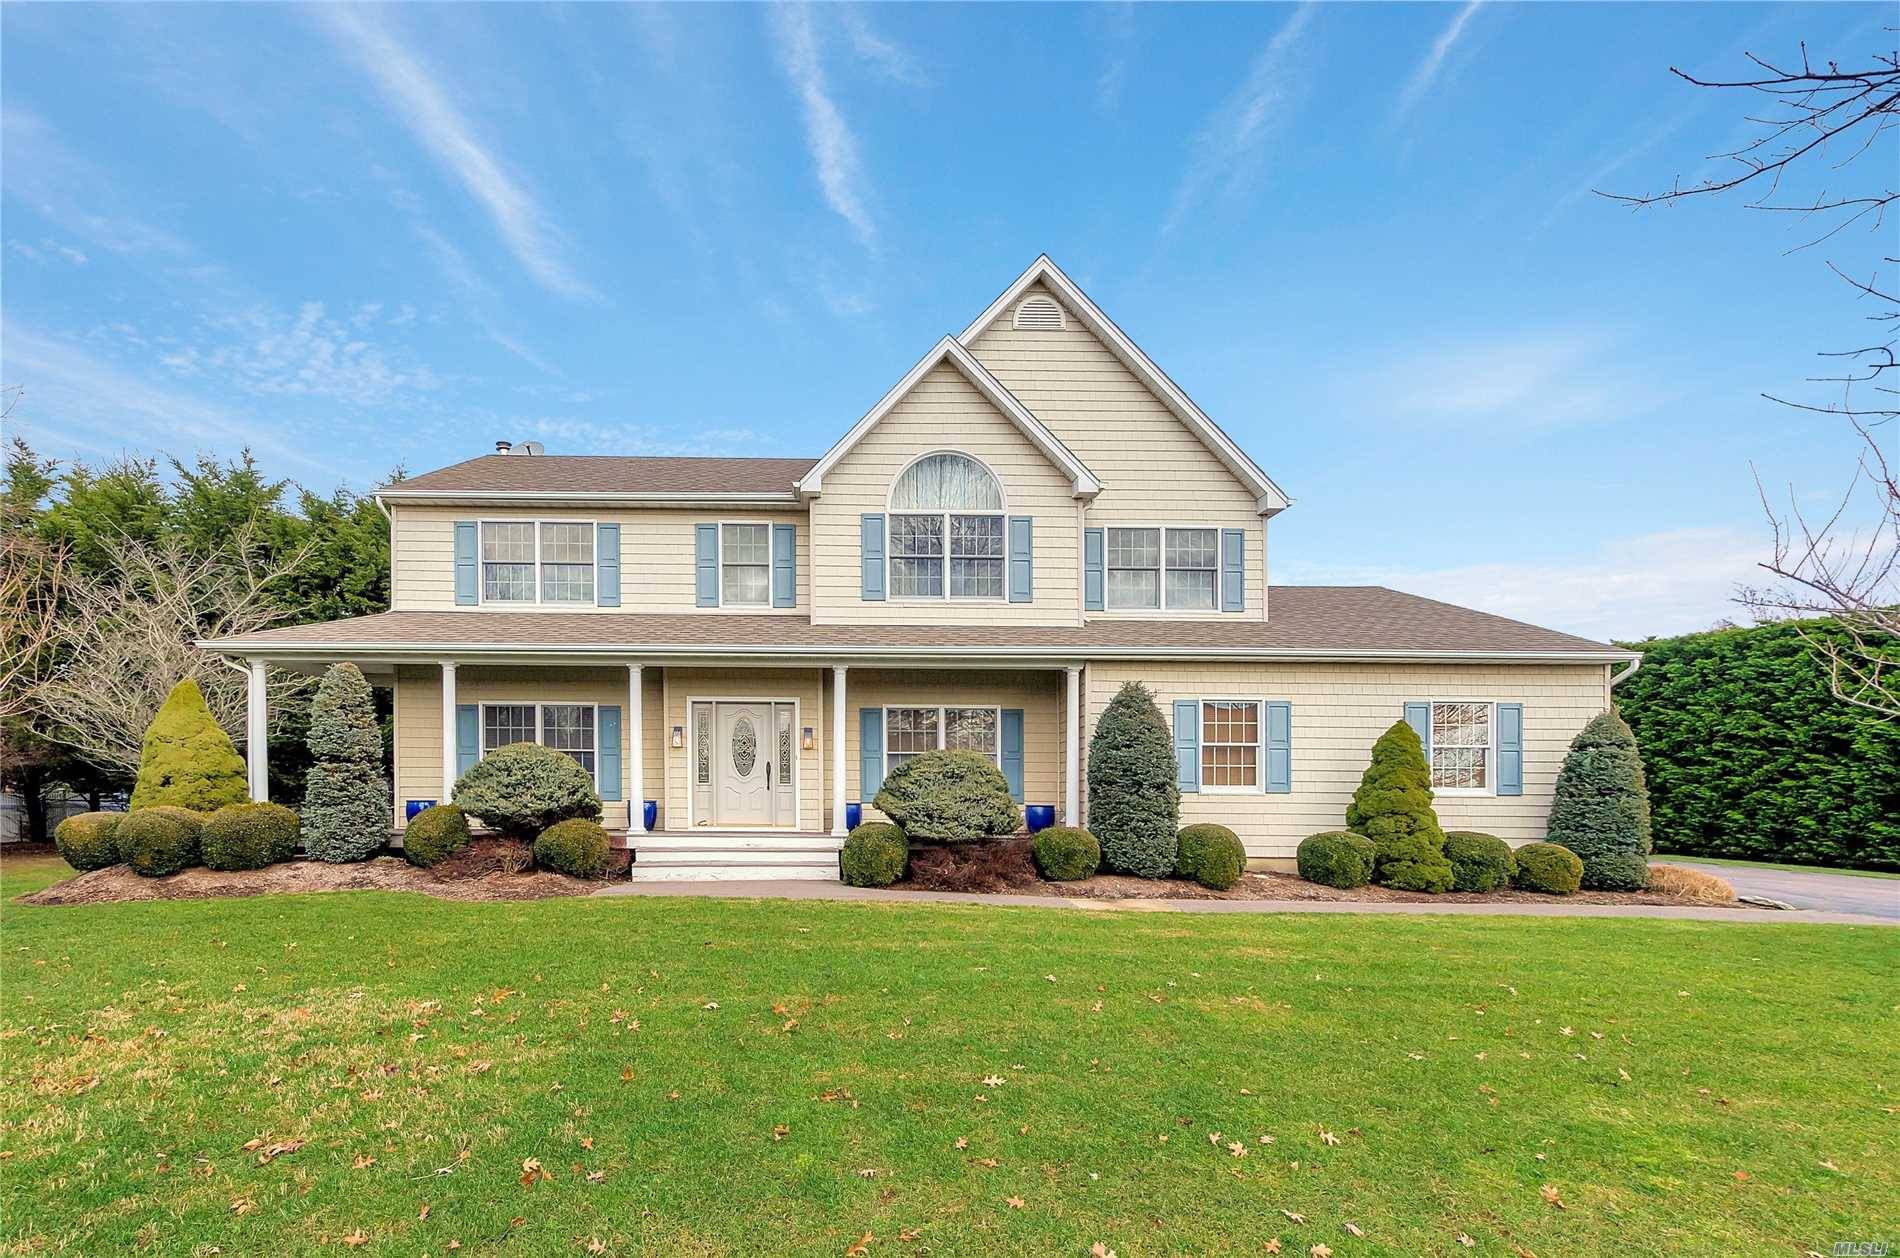 Southold Angel Shores Bayfront Community Spacious Light Filled 4 5 Bedroom 3 Bath Traditional Featuring A Stunning Custom Designed Chef's Kitchen, Great Room W Fireplace, Living Room Formal Dining Room ...